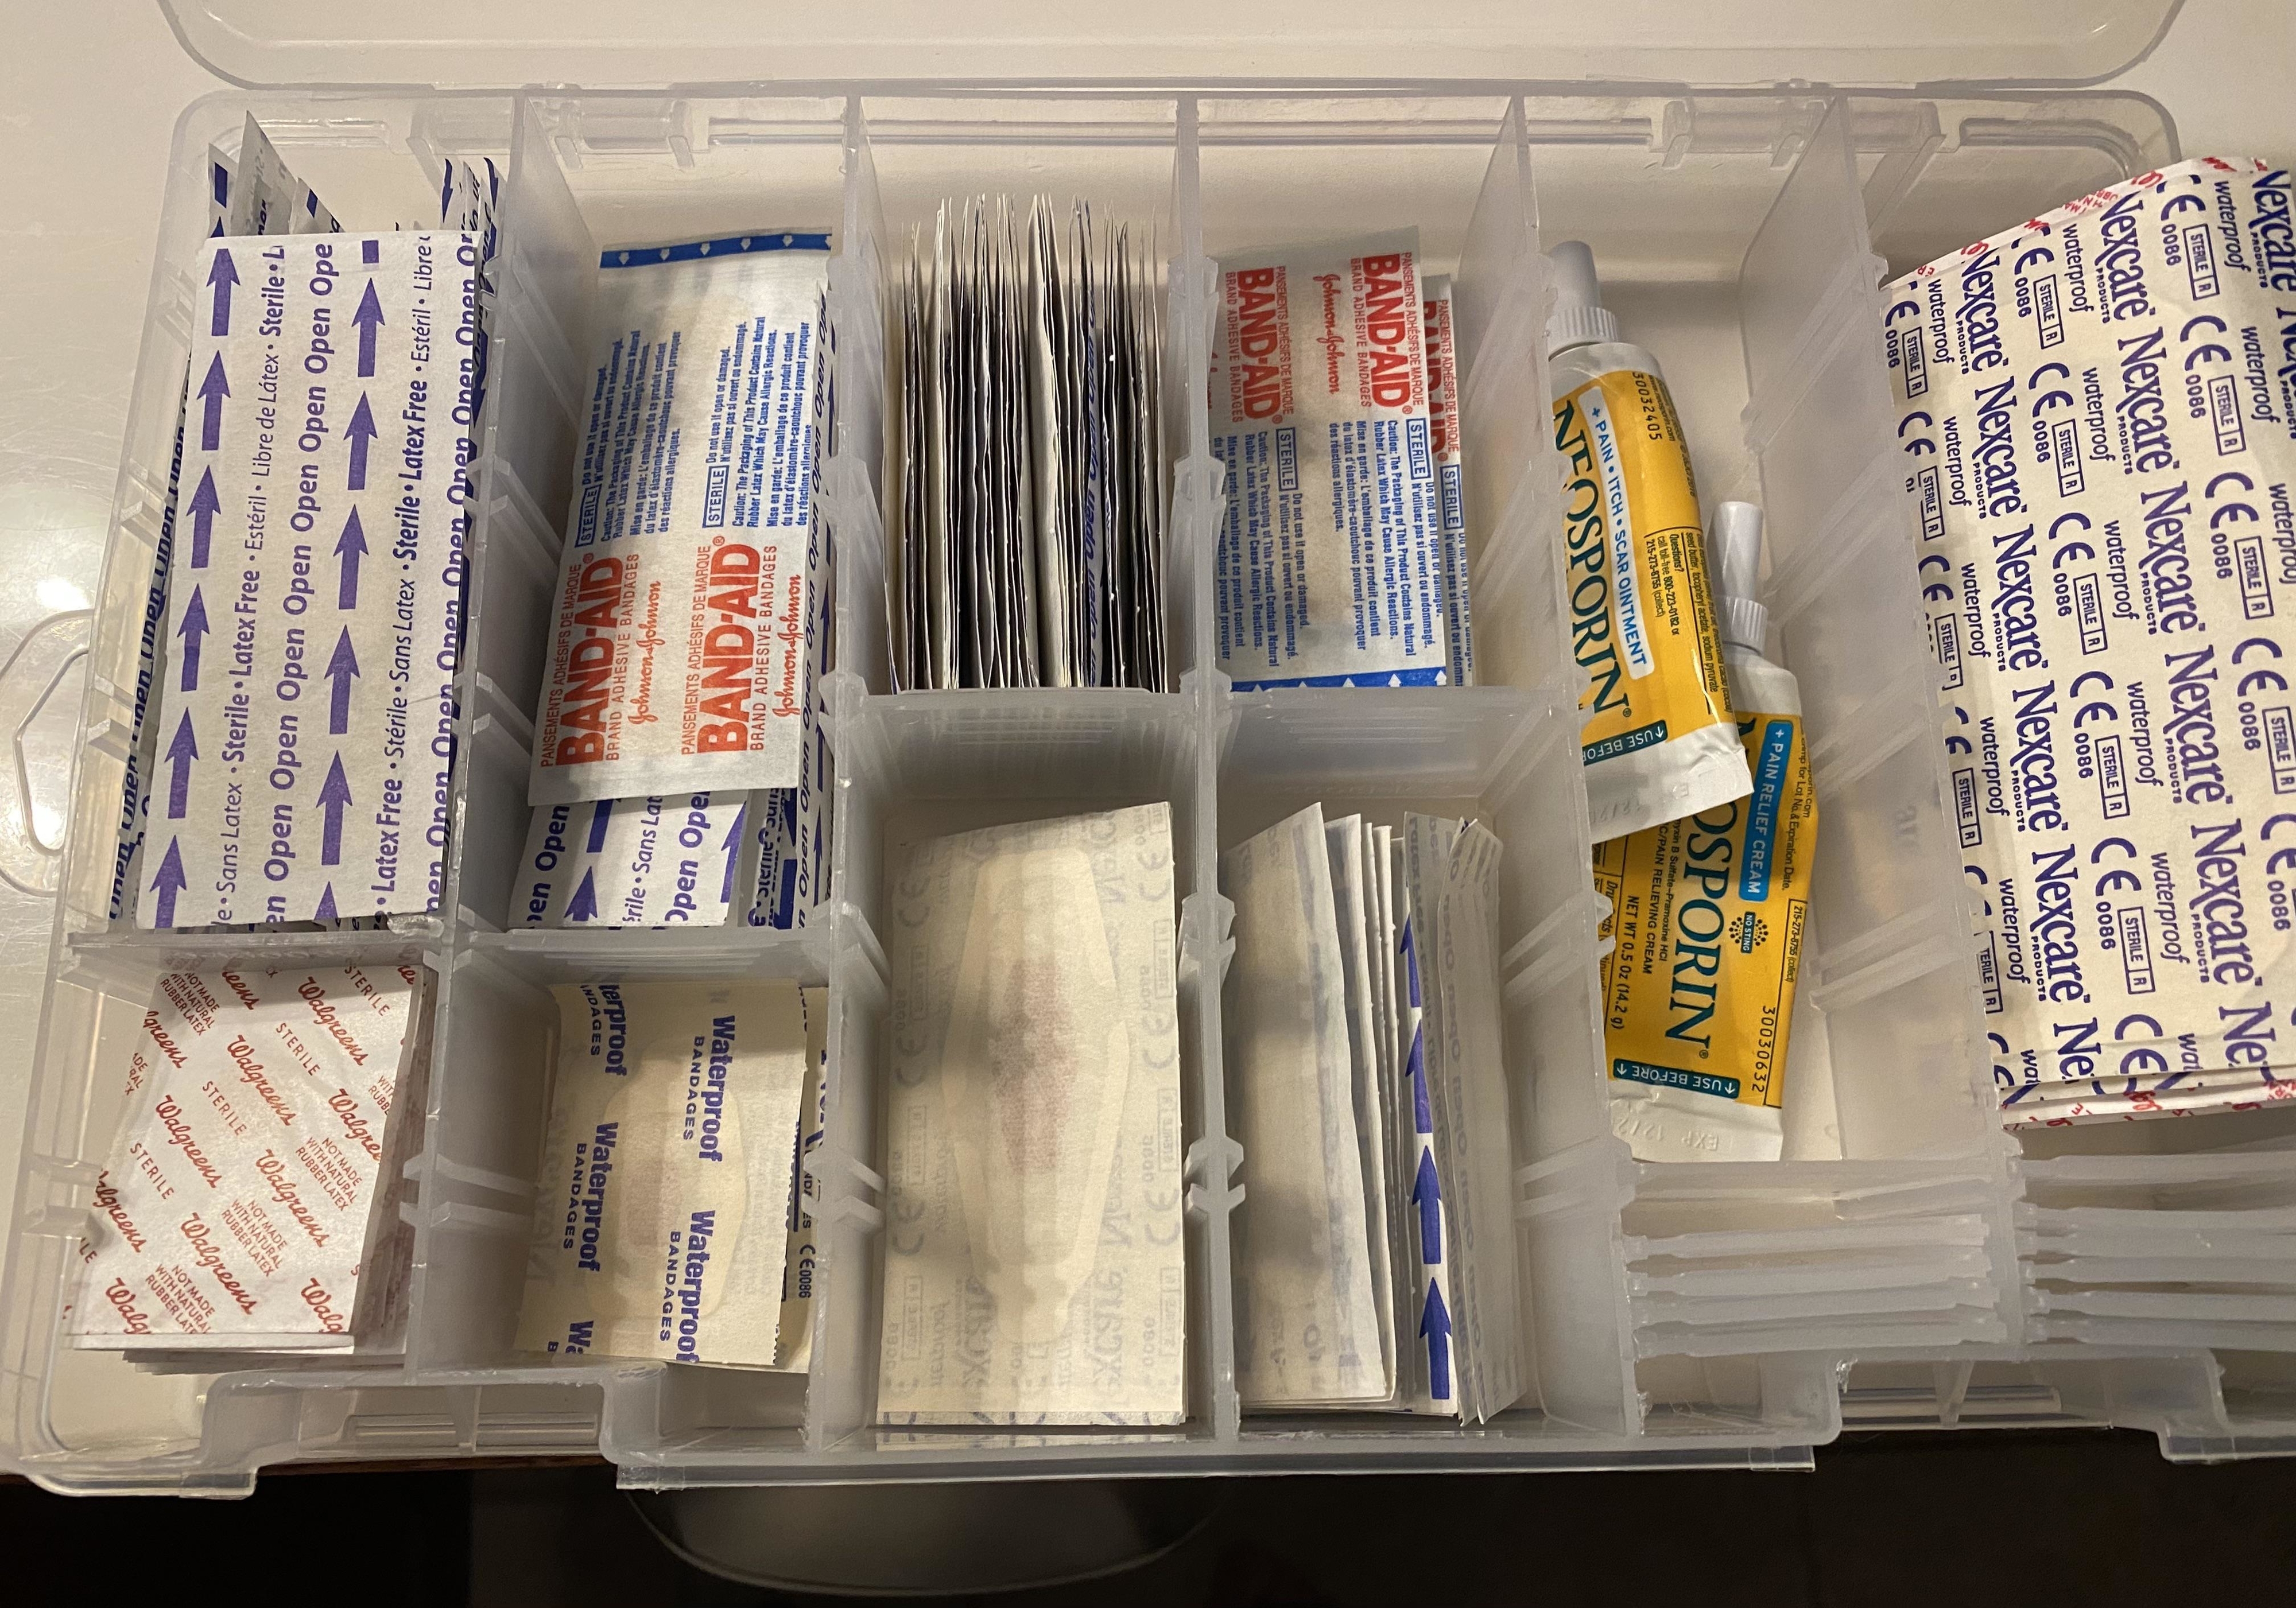 A bin full of every type of bandage, organized in clear plastic